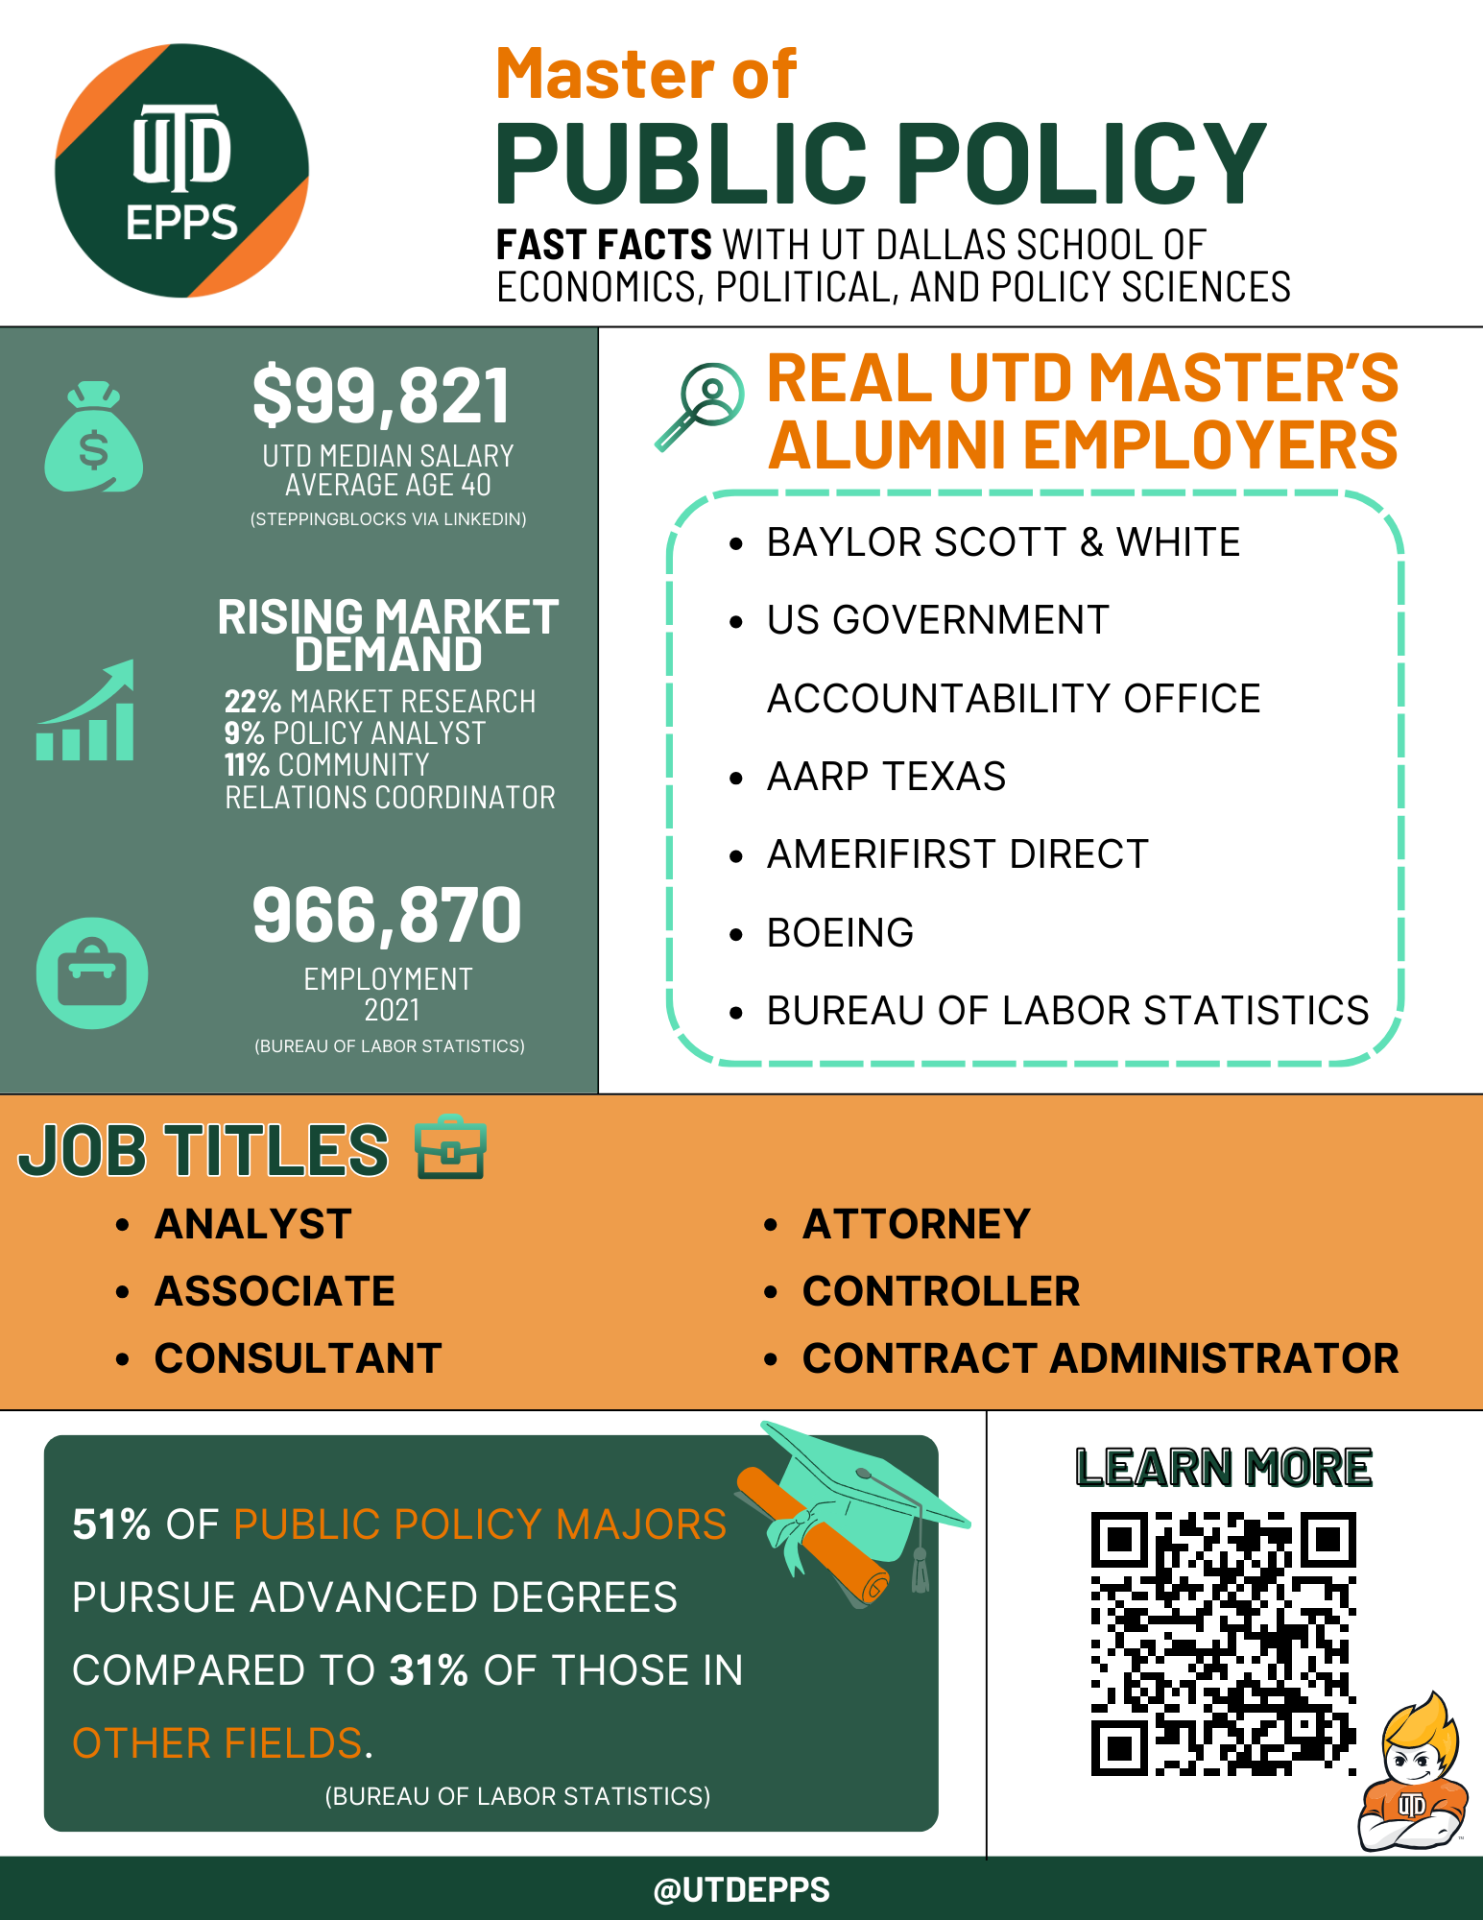 Master of Public Policy. Fast Facts with Ut Dallas school of economics, political, and policy sciences.

,821 is the UTD Median Salary
(Average age 40). Data is from Steppingblocks via Linkedin. RISING Market demand: 22% MARKET RESEARCH, 9% POLICY ANALYST, and 11% COMMUNITY RELATIONS COORDINATOR. 966,870 employment in 2021. Data is from Bureau of Labor Statistics.

REAL UTD MASTER’S ALUMNI EMPLOYERS include:
Baylor Scott & White
US Government Accountability Office
AARP Texas
Amerifirst Direct
Boeing
Bureau of Labor Statistics

,821
UTD Median Salary
Average age 40
RISING Market demand
22% MARKET RESEARCH
9% POLICY ANALYST
11% COMMUNITY    RELATIONS COORDINATOR
966,870
employment
 2021

Job Titles include:
Analyst
Associate
Consultant
Attorney
Controller
Contract Administrator

51% of public policy majors pursue advanced degrees compared to 31% of those in other fields. Data is from BUREAU OF LABOR STATISTICS.

Learn more by scanning the QR code.

@UTDEPPS